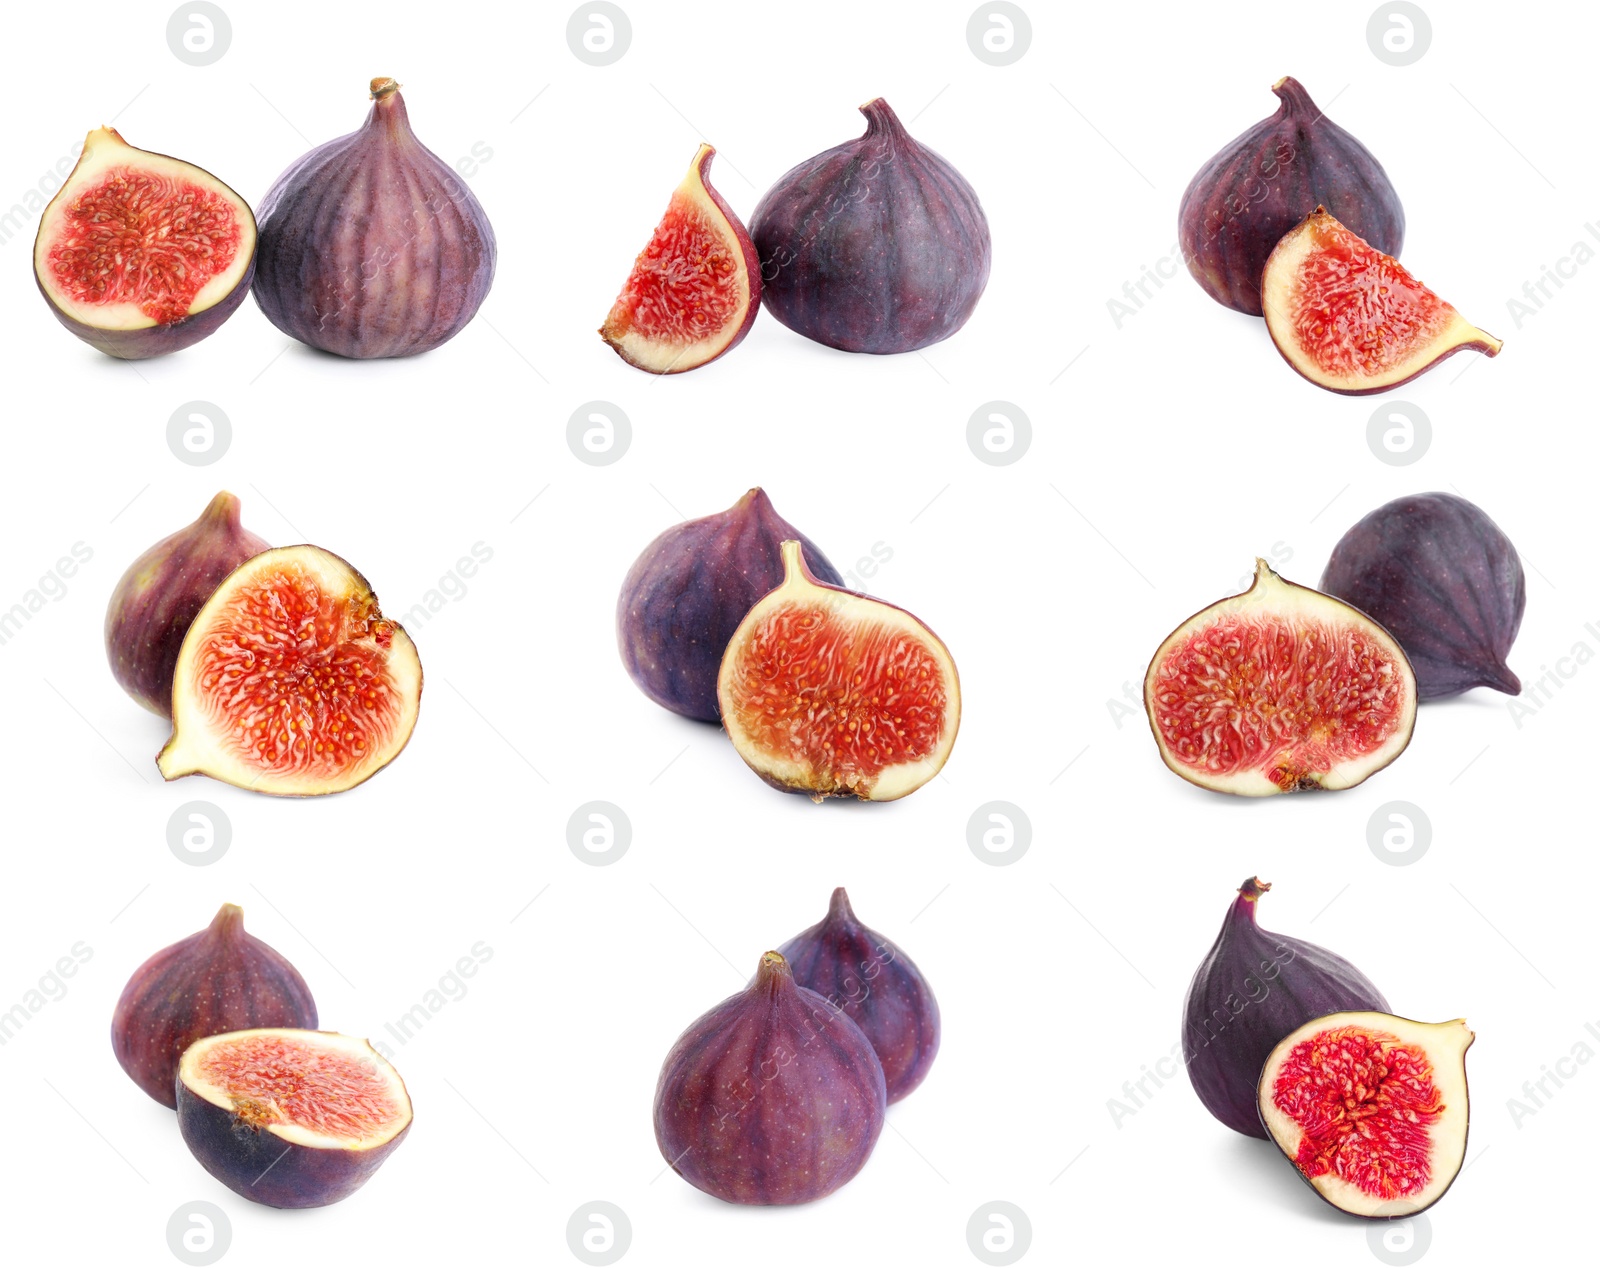 Image of Set of cut and whole figs on white background